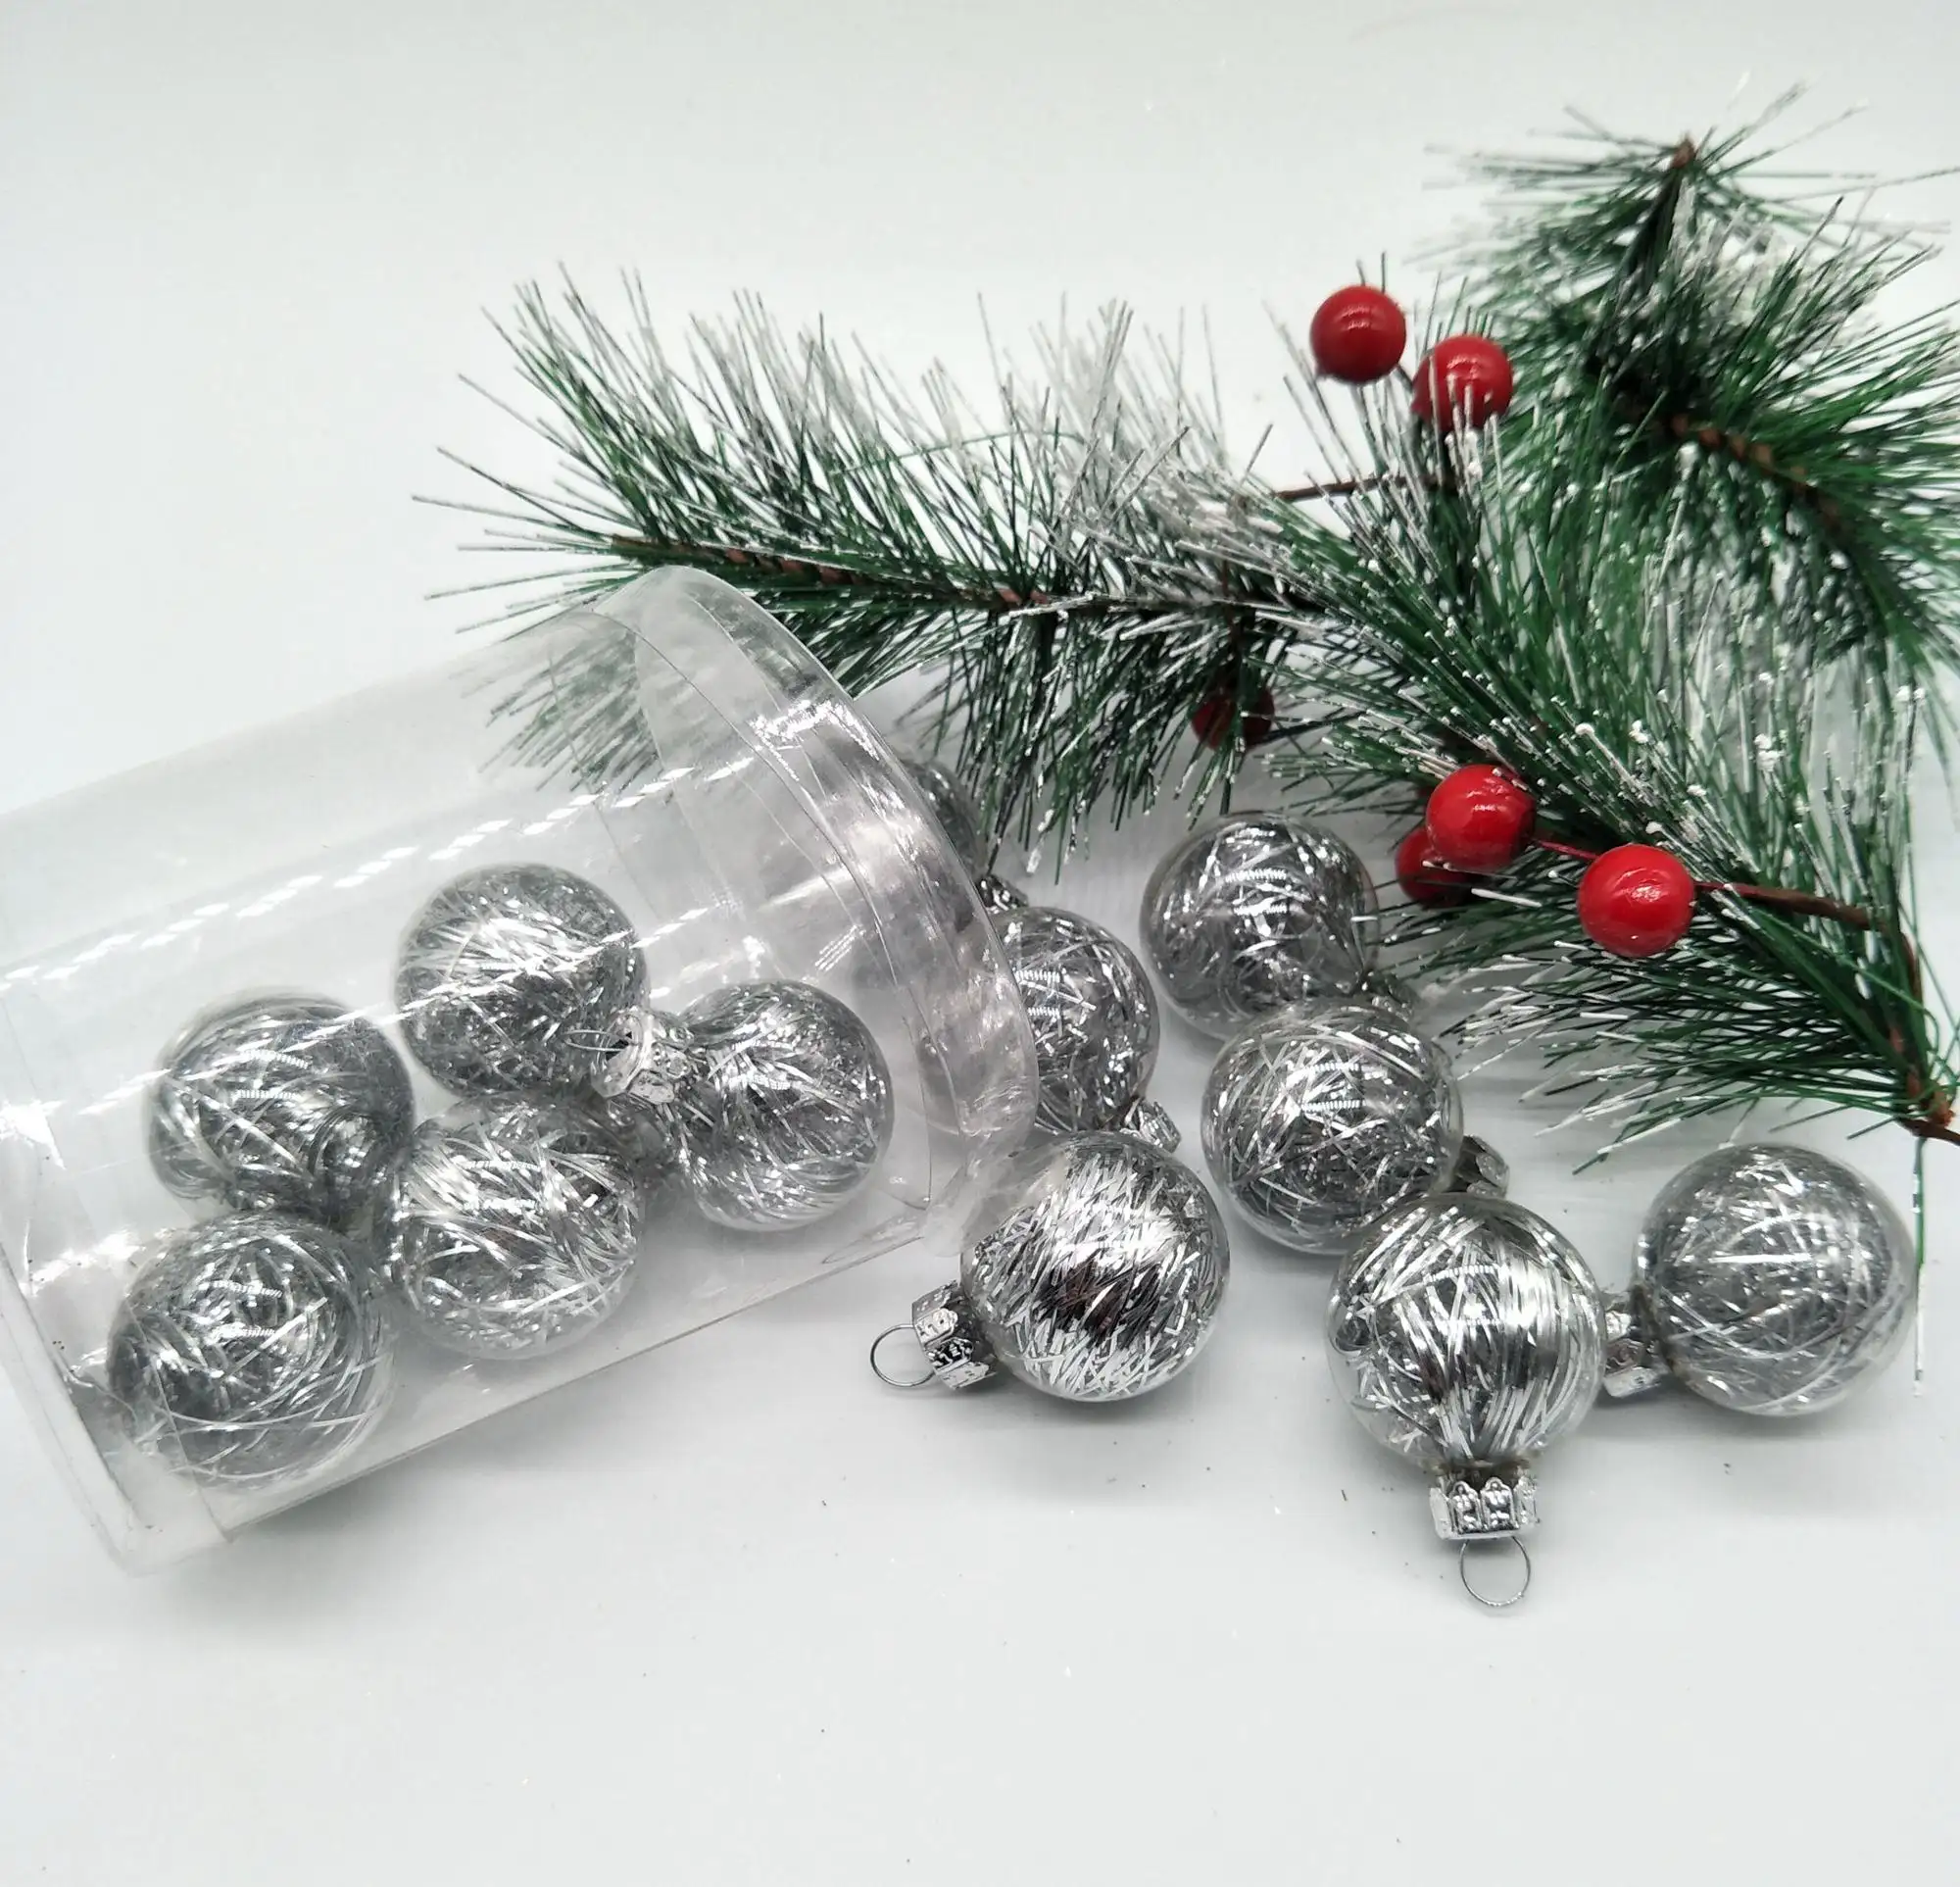 Christmas tree ornament 3 cm clear red gold hand painted design tube glass ball with gold and silver filaments inside